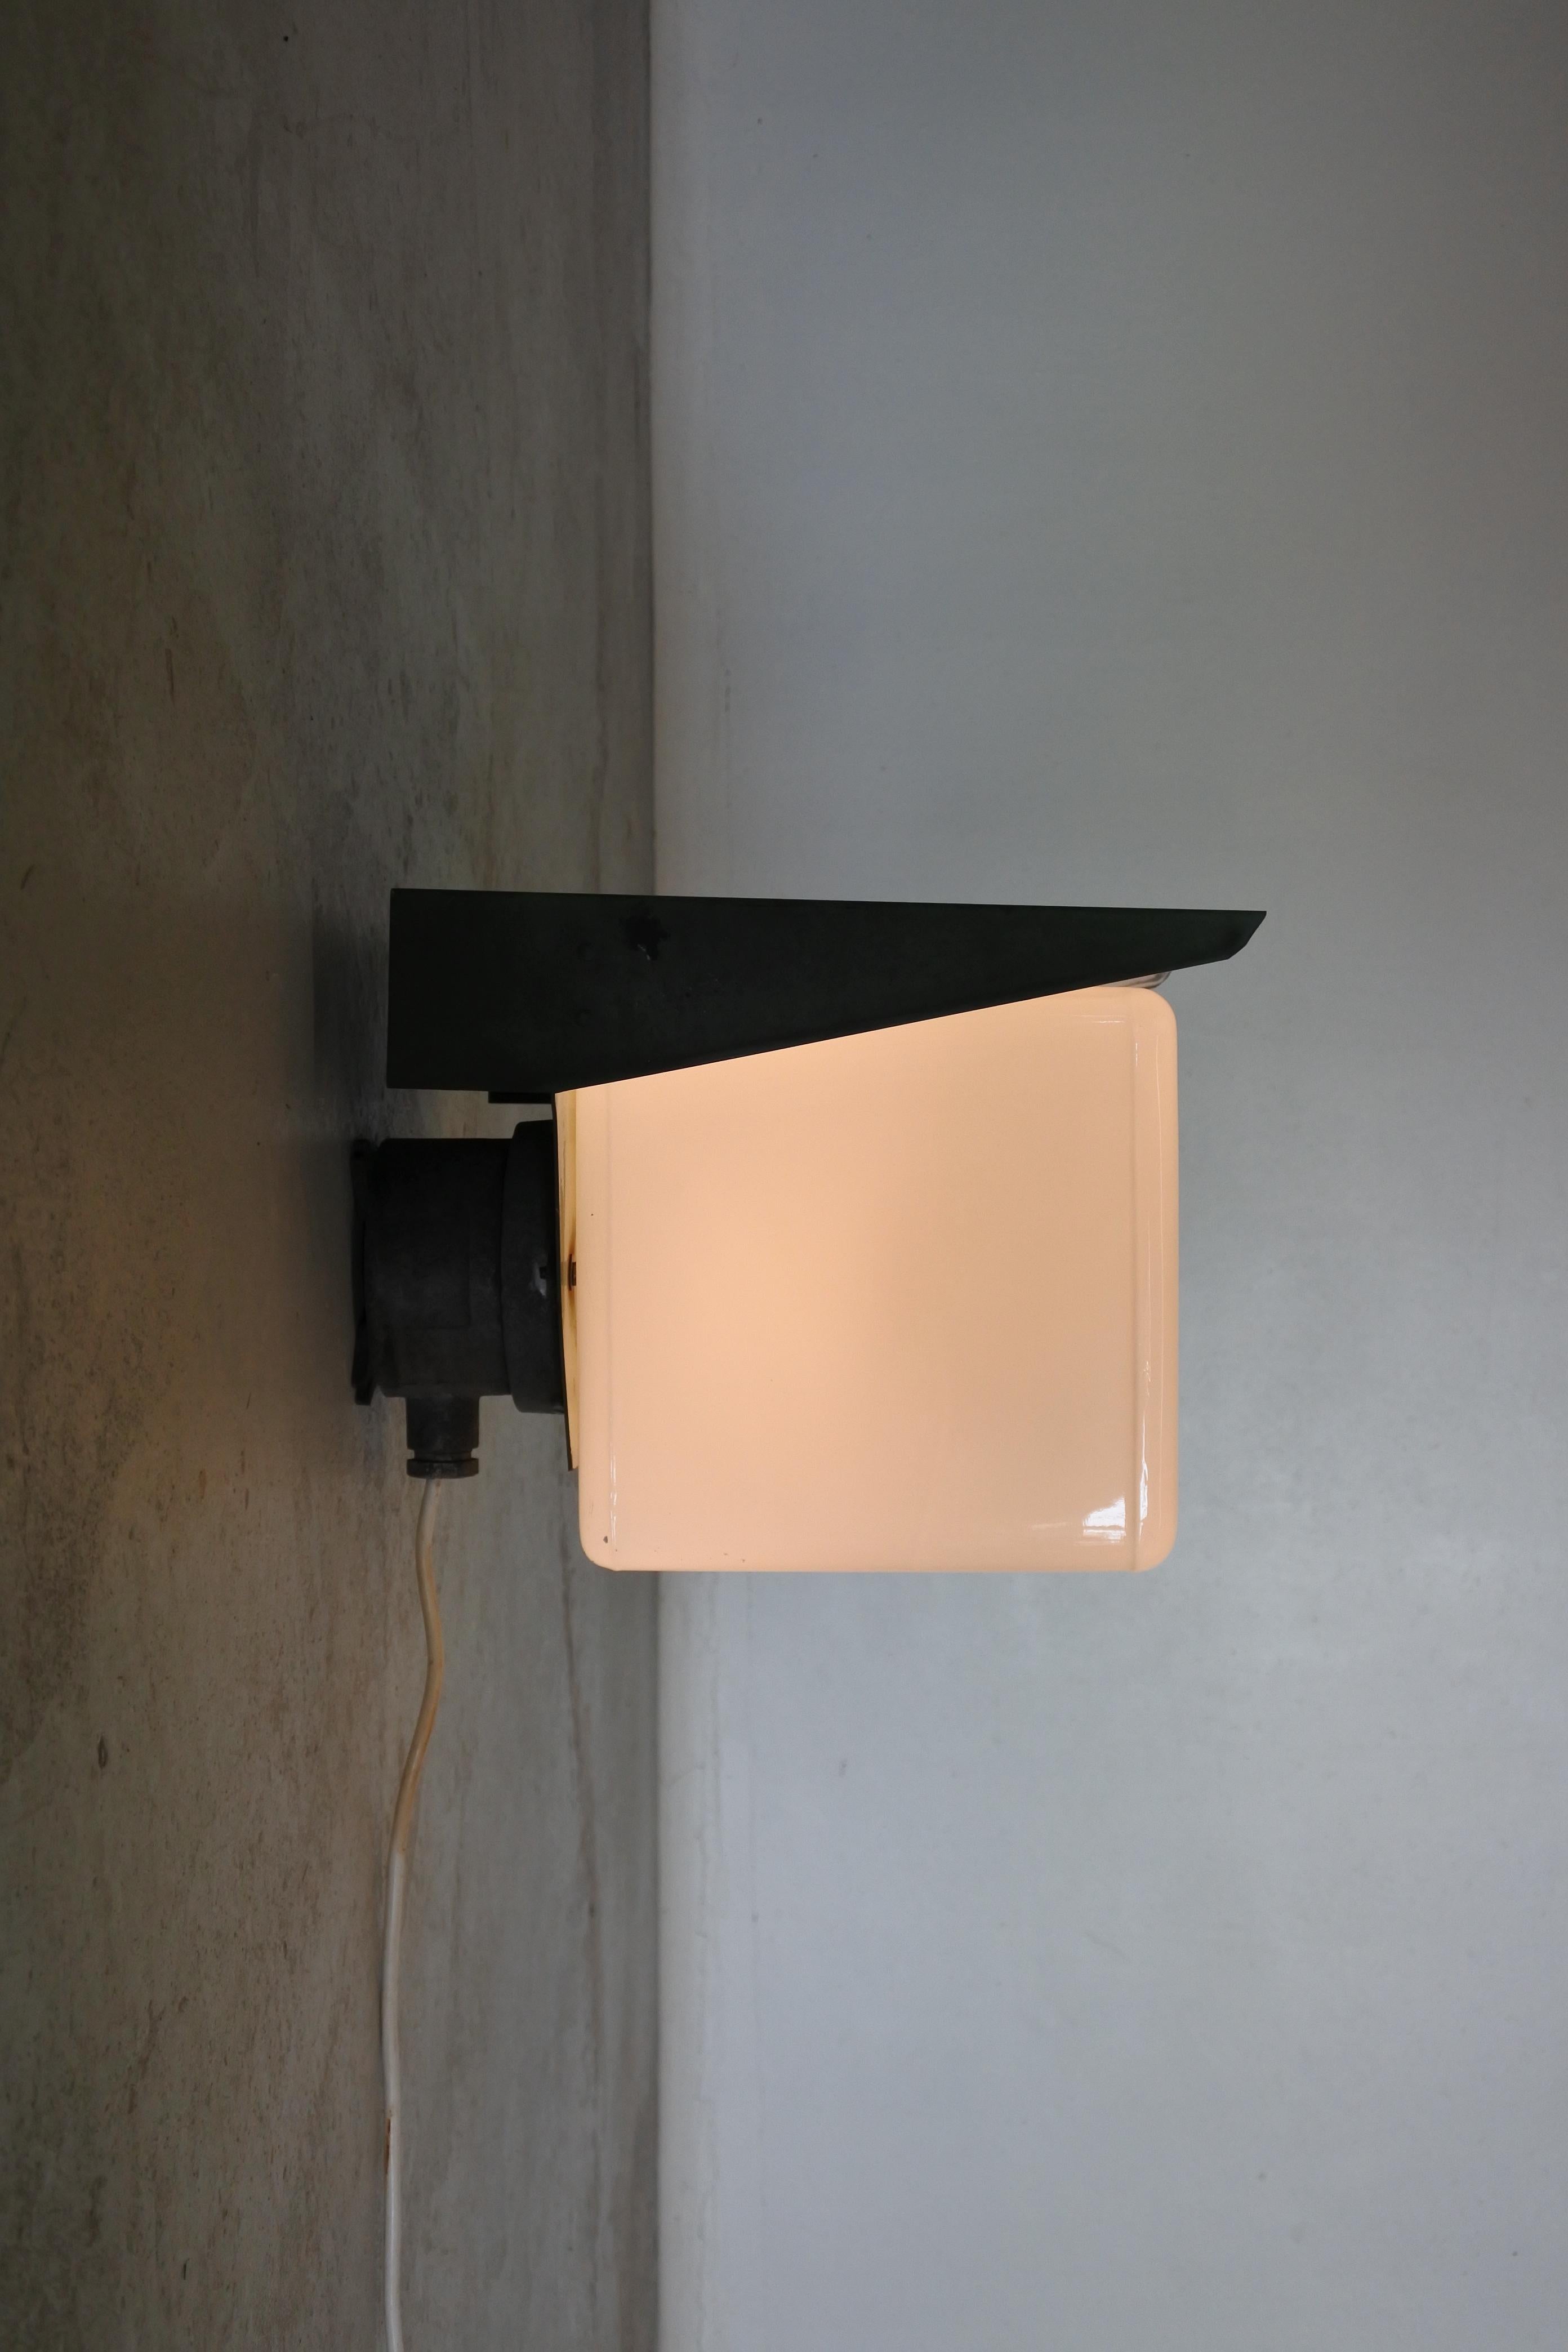 Finnish Copper and Opaline Glass Wall Lamp by Itsu, Finland, 1950s For Sale